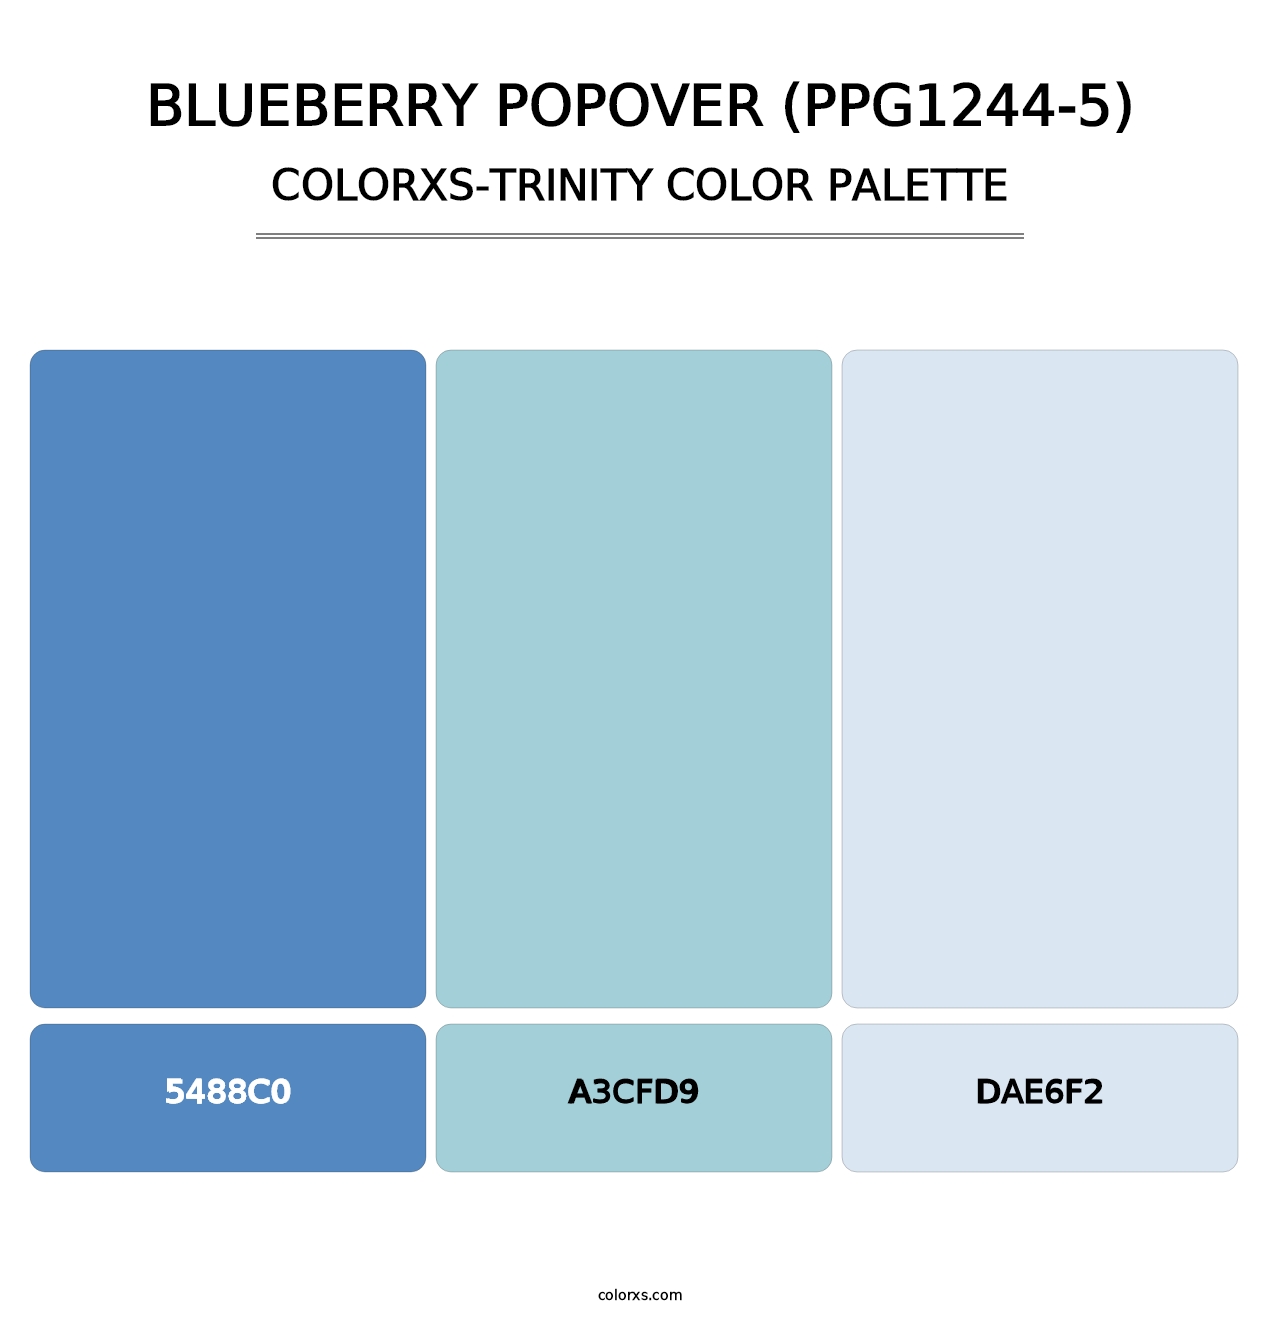 Blueberry Popover (PPG1244-5) - Colorxs Trinity Palette